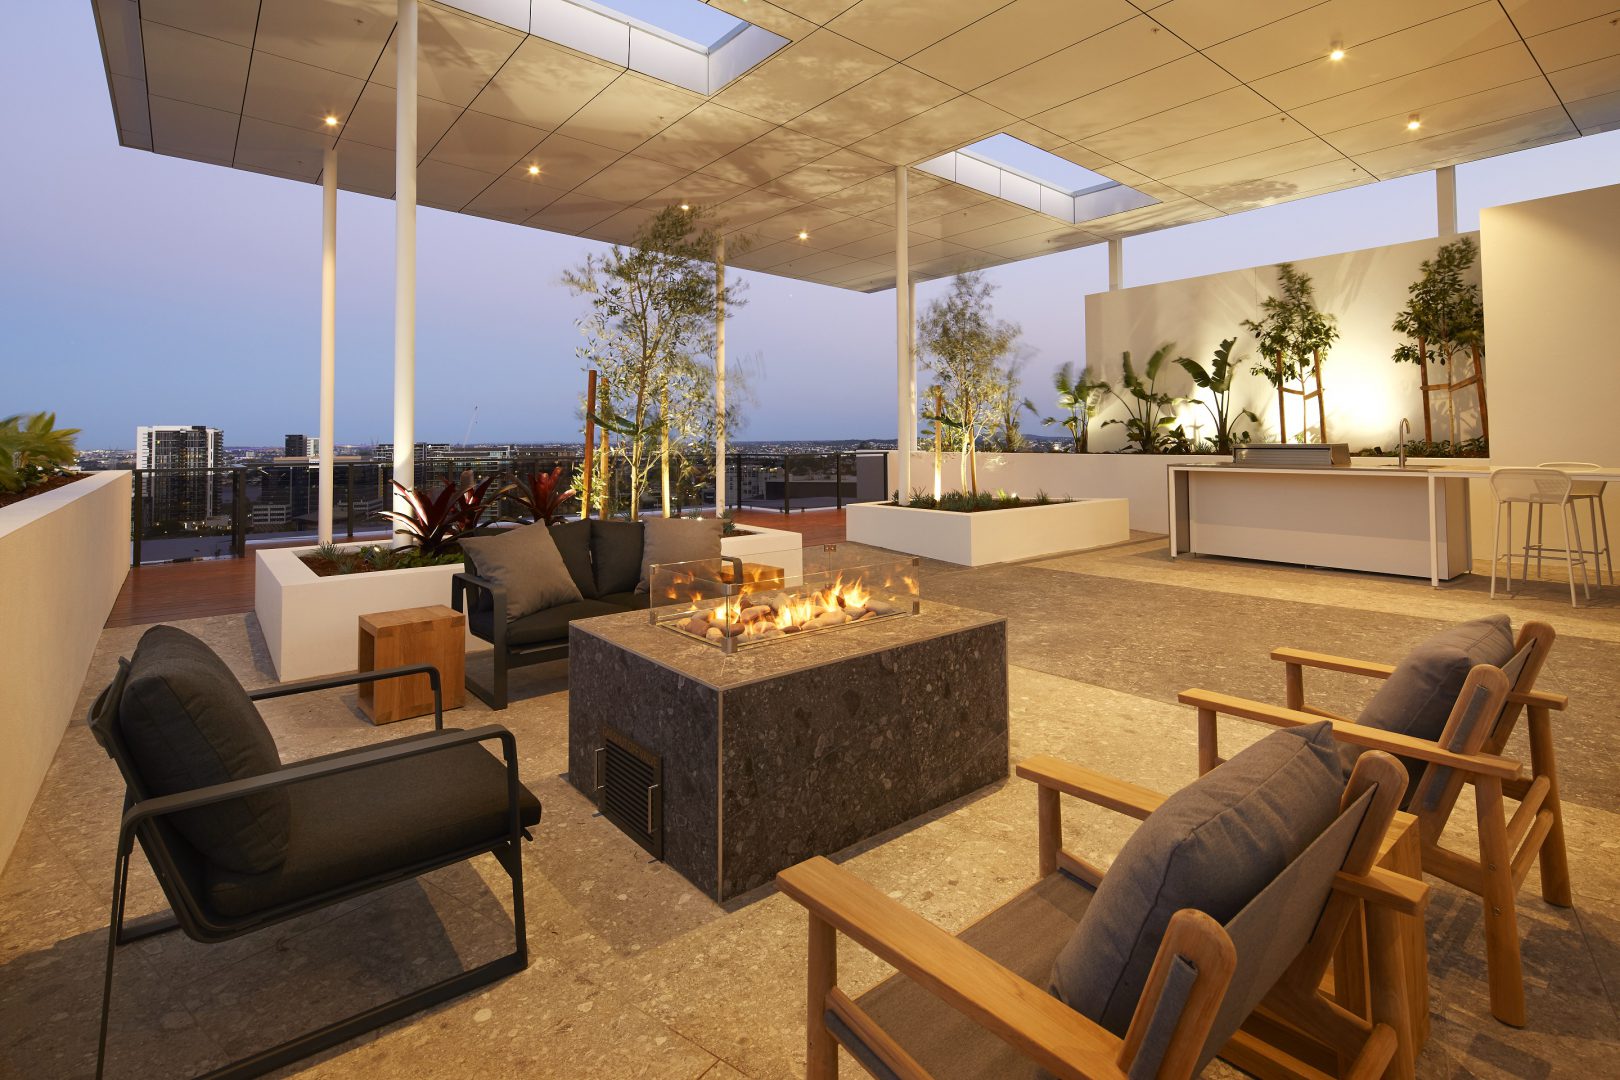 Omega Apartments rooftop recreational area with solar-powered subtropical garden, gas fire pit and bbqs (image supplied by the developer)